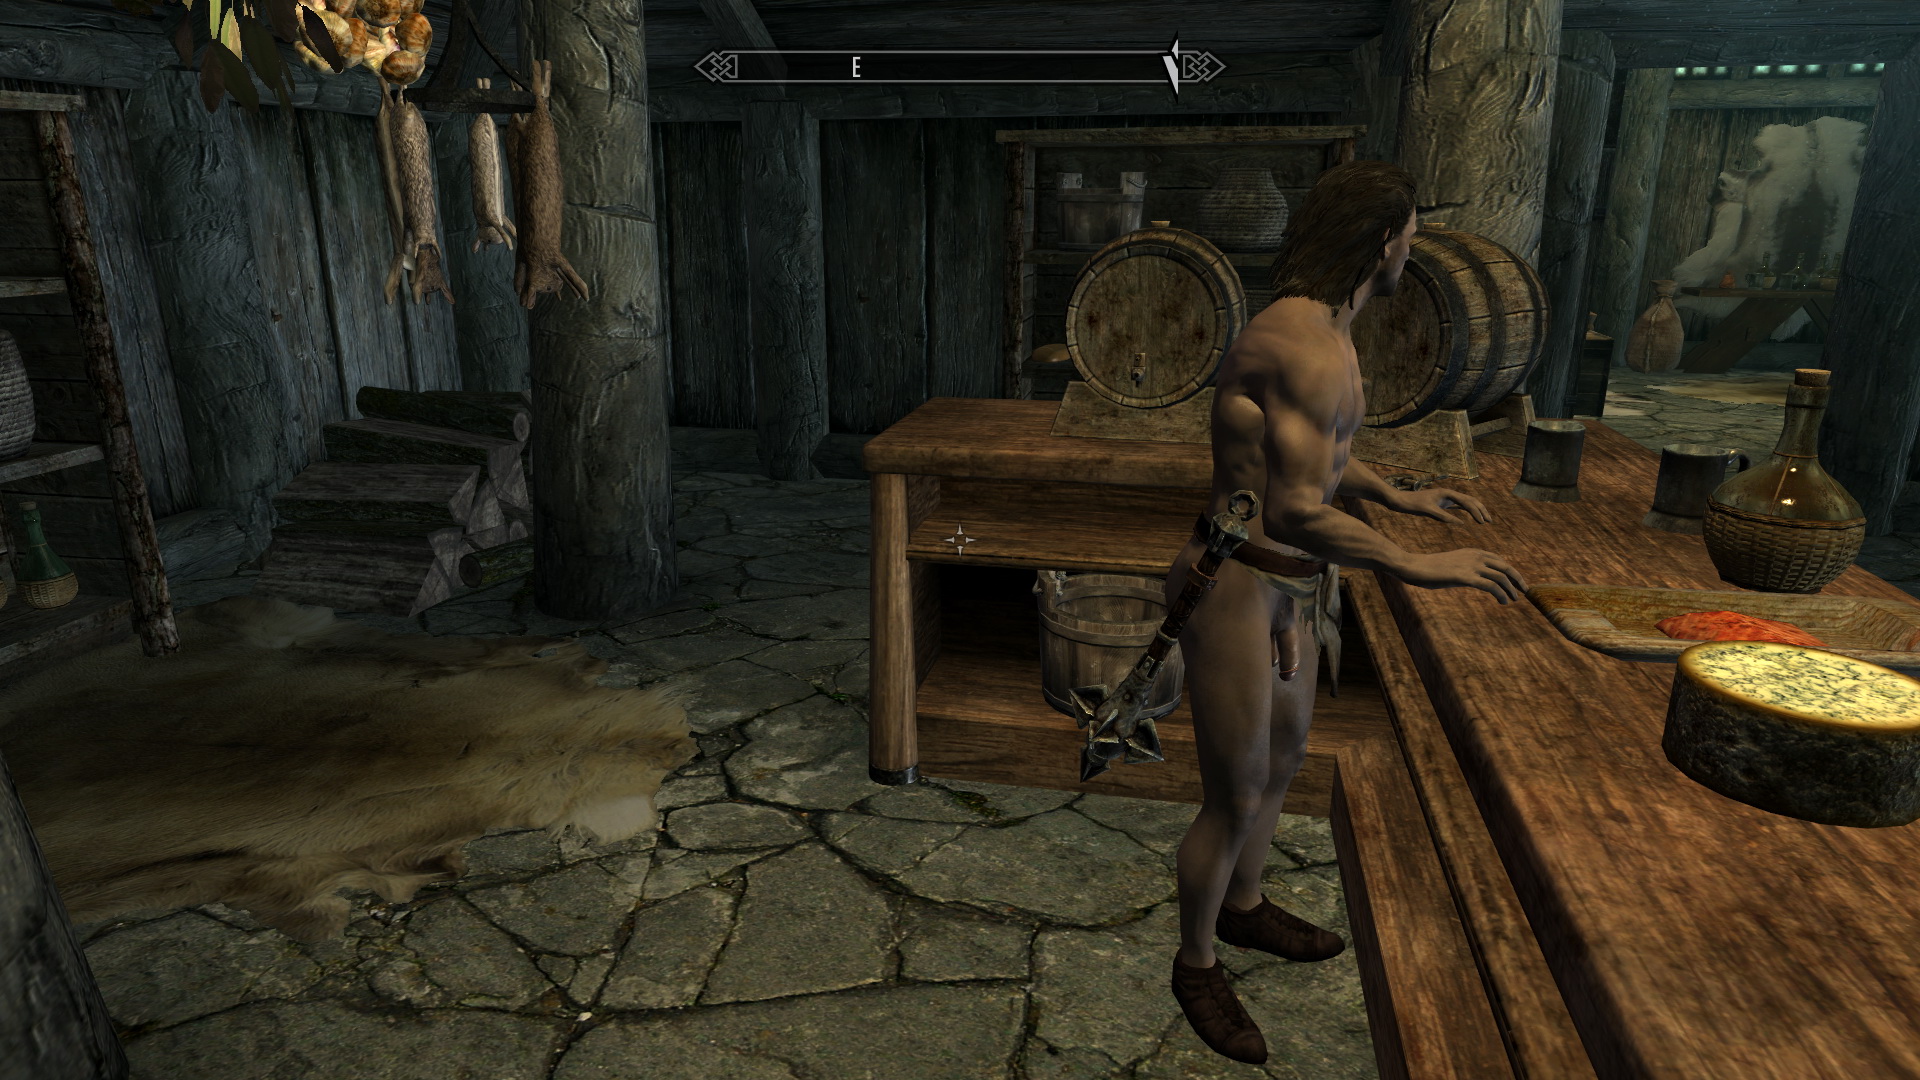 Wis Skimpy Male Armors Conversions For Sos Skyrim.